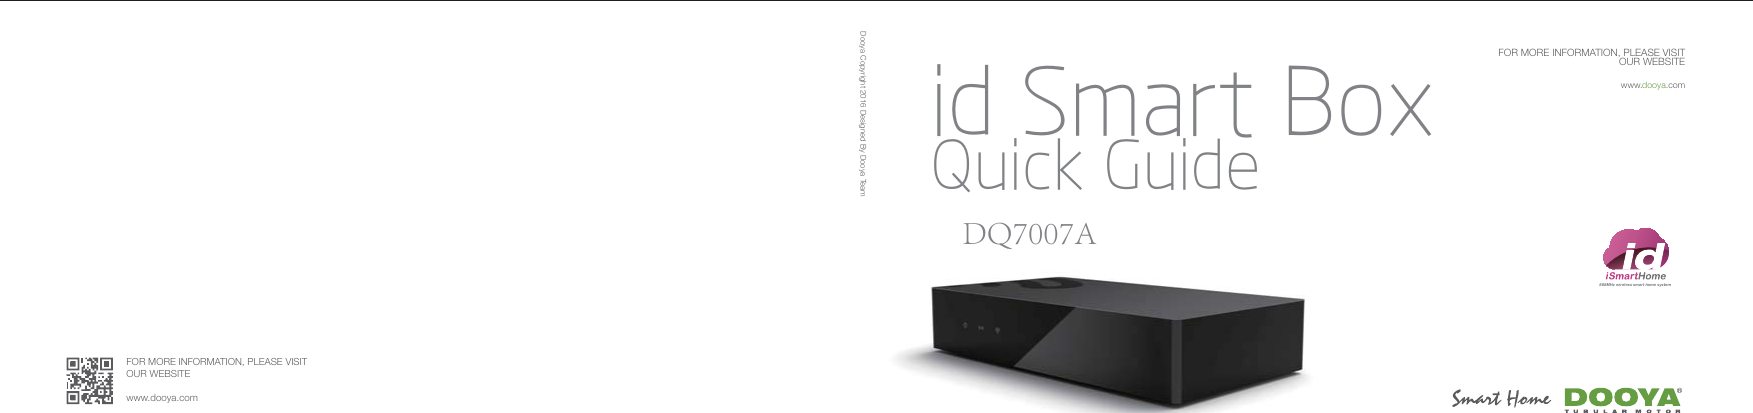 Quick Guideid Smart Box868MHz wireless smart home systemFOR MORE INFORMATION, PLEASE VISITOUR WEBSITEwww.dooya.comDooya Copyright 2016 Designed By Dooya TeamFOR MORE INFORMATION, PLEASE VISITOUR WEBSITEwww.dooya.comDQ7007A